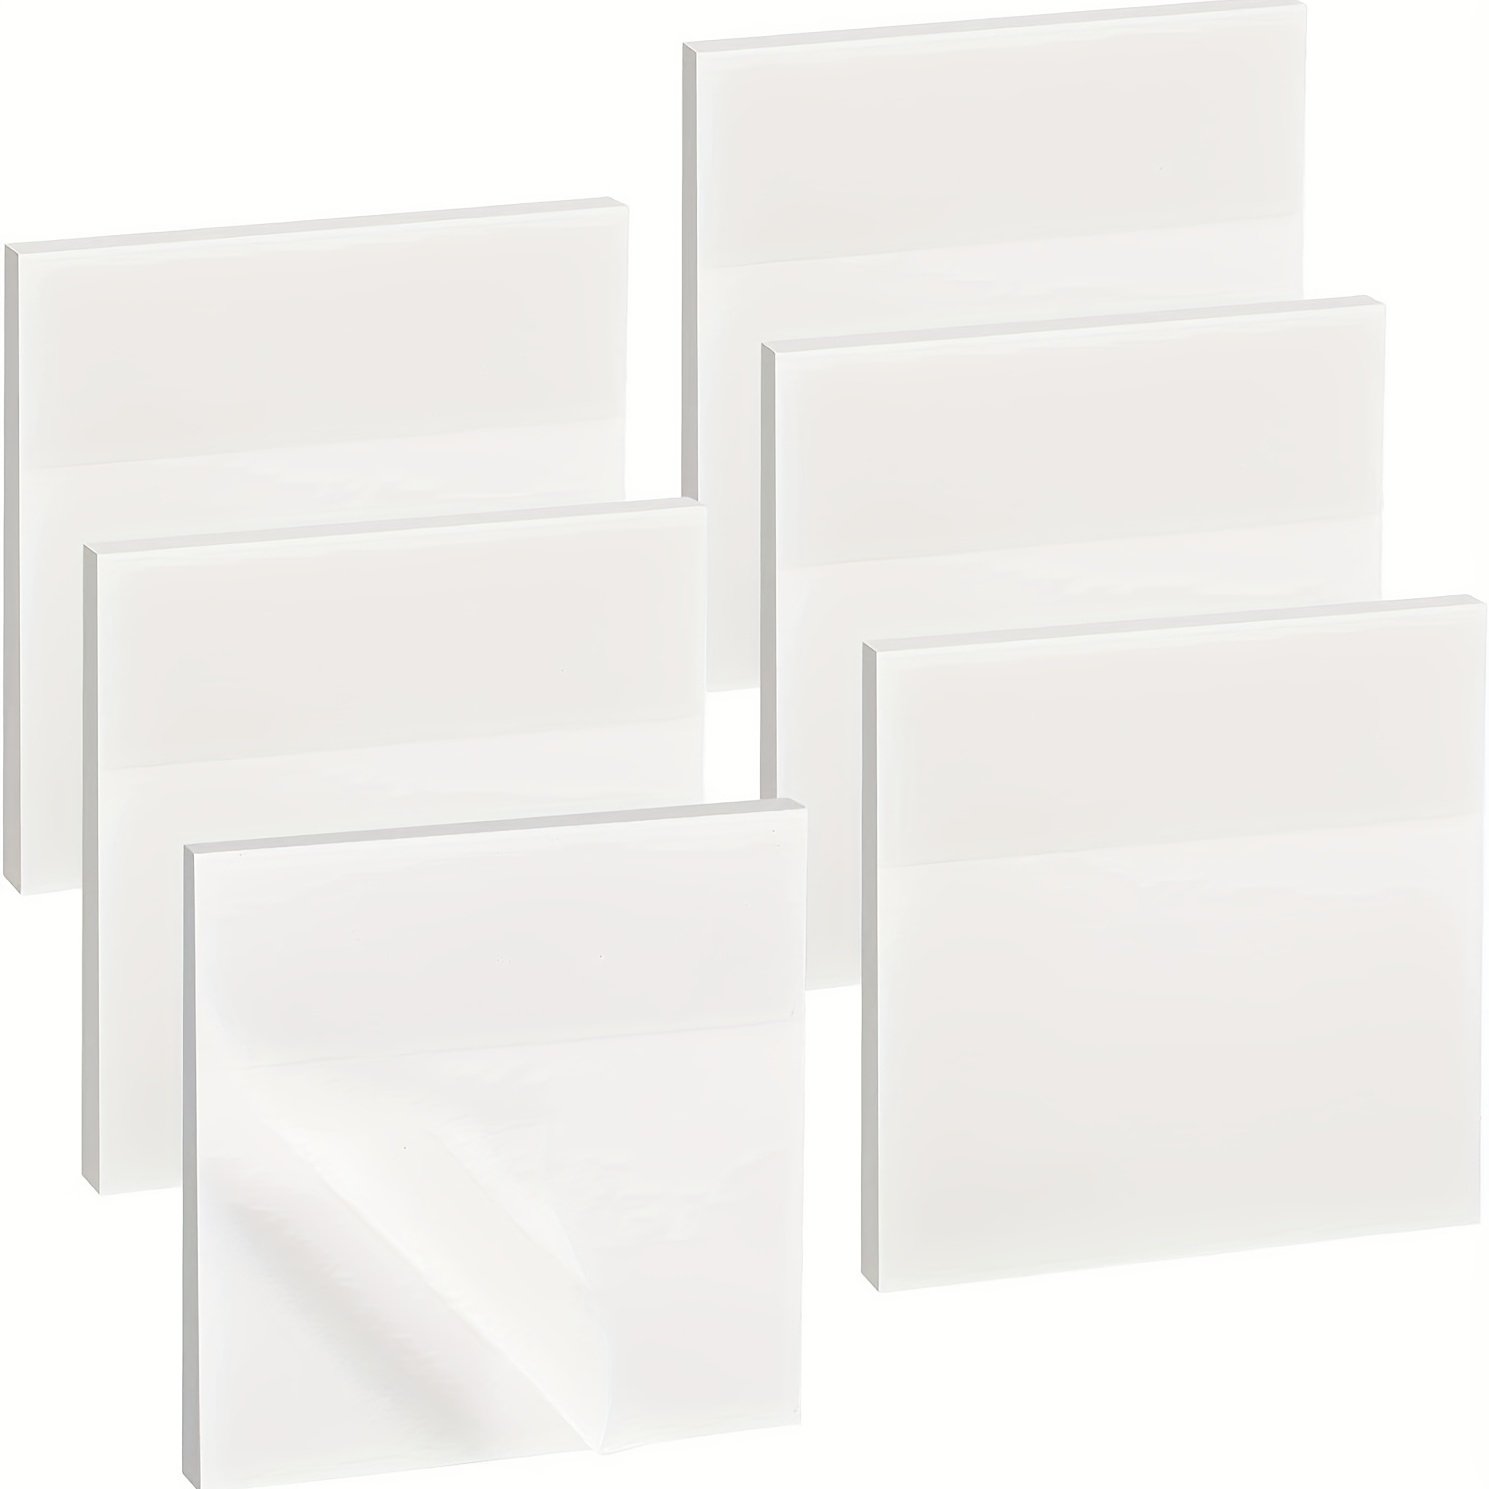  Transparent Sticky Note Pads, 75mm Square, Pack of 10 : Office  Products